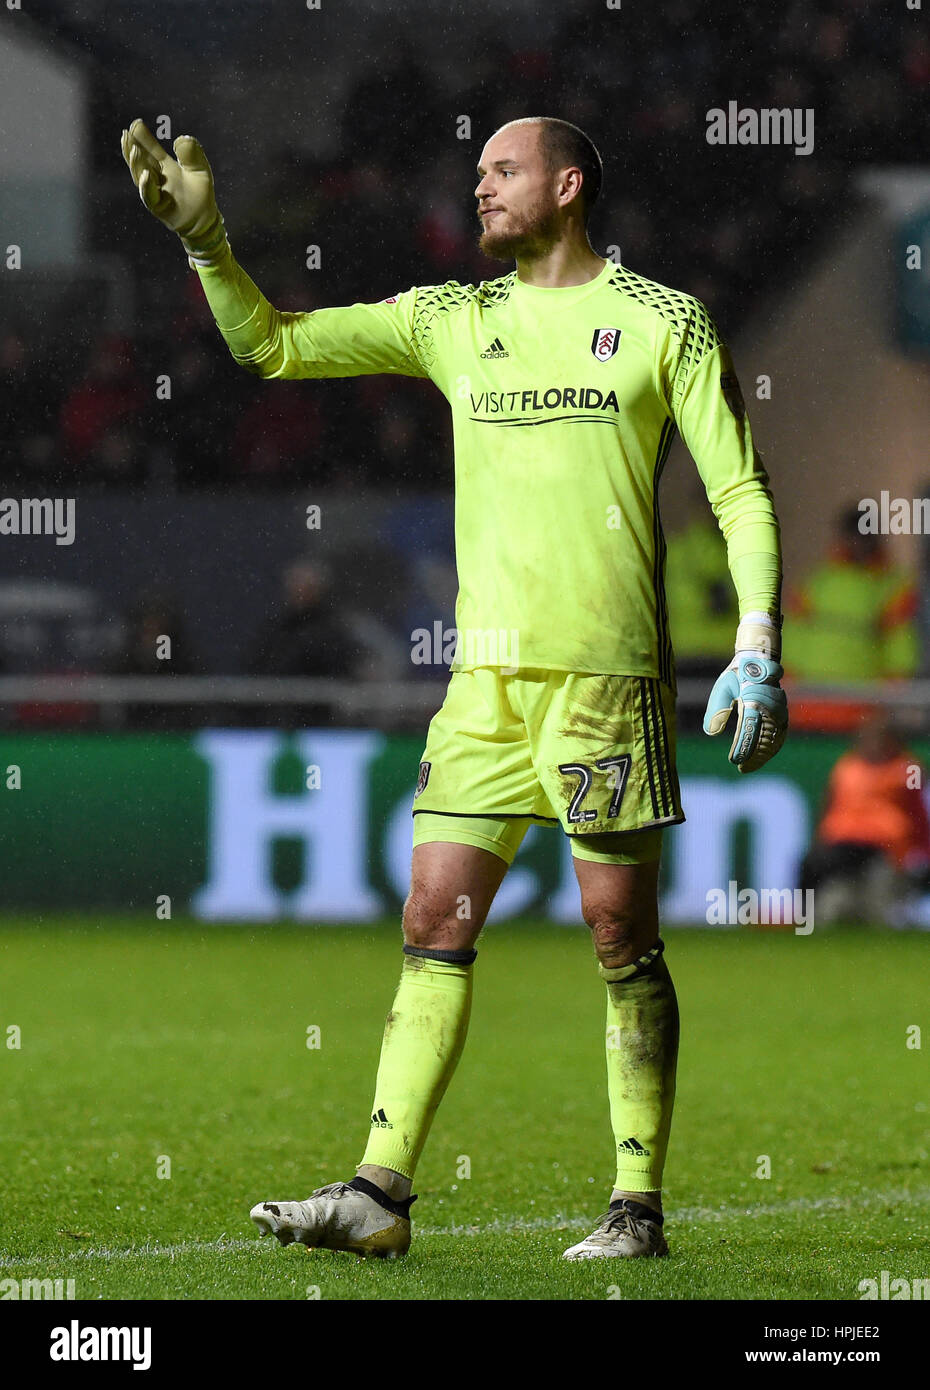 Fulham goalkeeper David Button during the Sky Bet Championship match at Ashton Gate, Bristol. PRESS ASSOCIATION Photo. Picture date: Wednesday February 22, 2017. See PA story SOCCER Bristol City. Photo credit should read: Simon Galloway/PA Wire. RESTRICTIONS: EDITORIAL USE ONLY No use with unauthorised audio, video, data, fixture lists, club/league logos or 'live' services. Online in-match use limited to 75 images, no video emulation. No use in betting, games or single club/league/player publications. Stock Photo